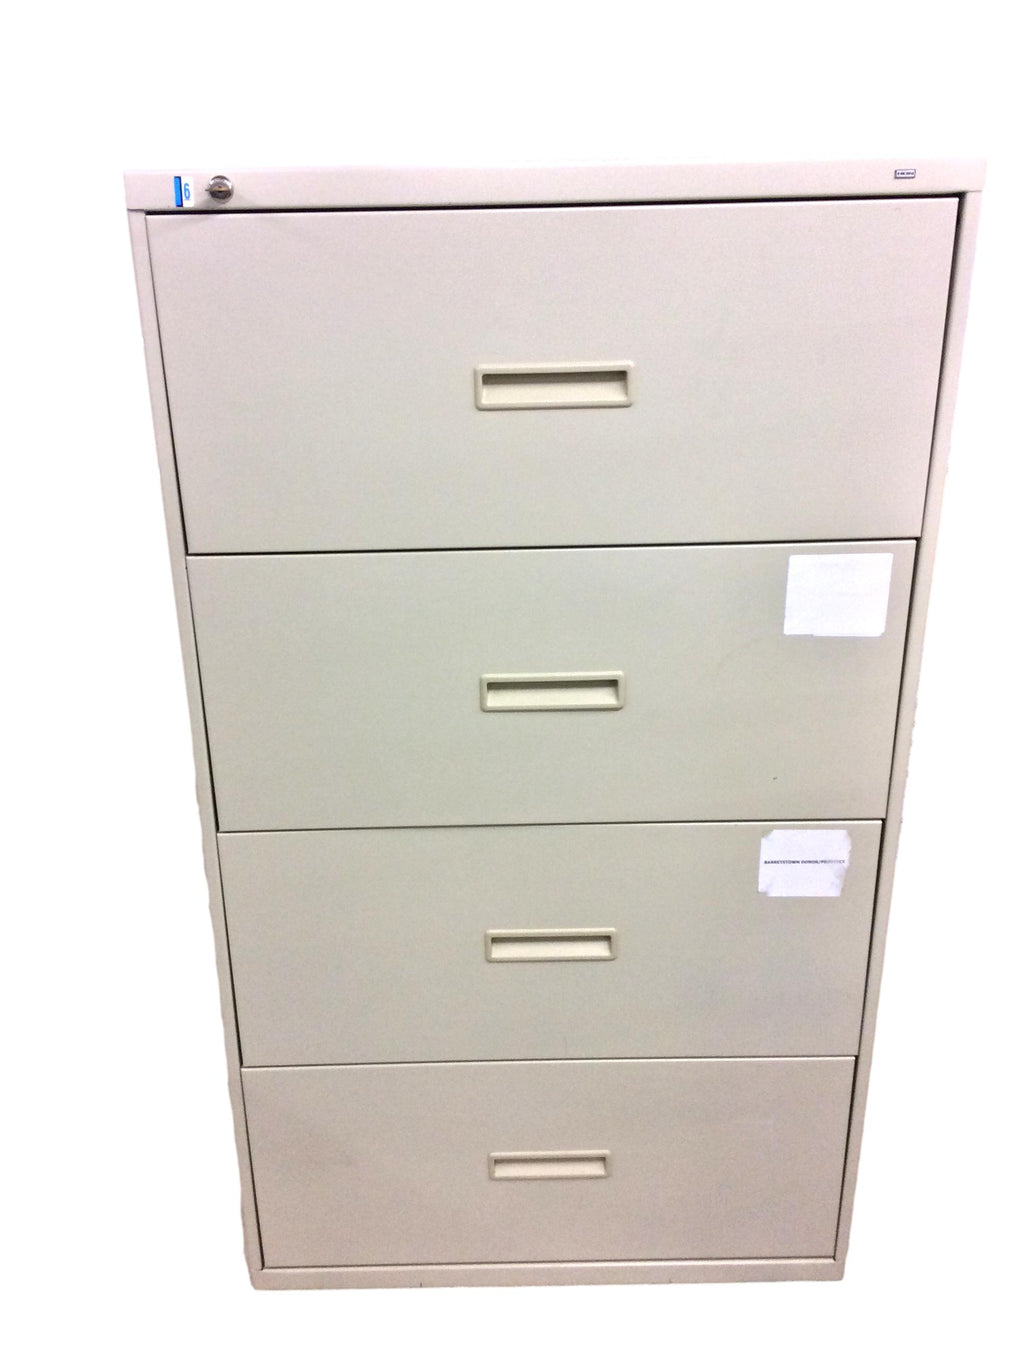 Pre-Owned HON, 4-Drawer, Lateral File Cabinet in Putty Finish  - 36"W x 19"D x 53 1/4"H